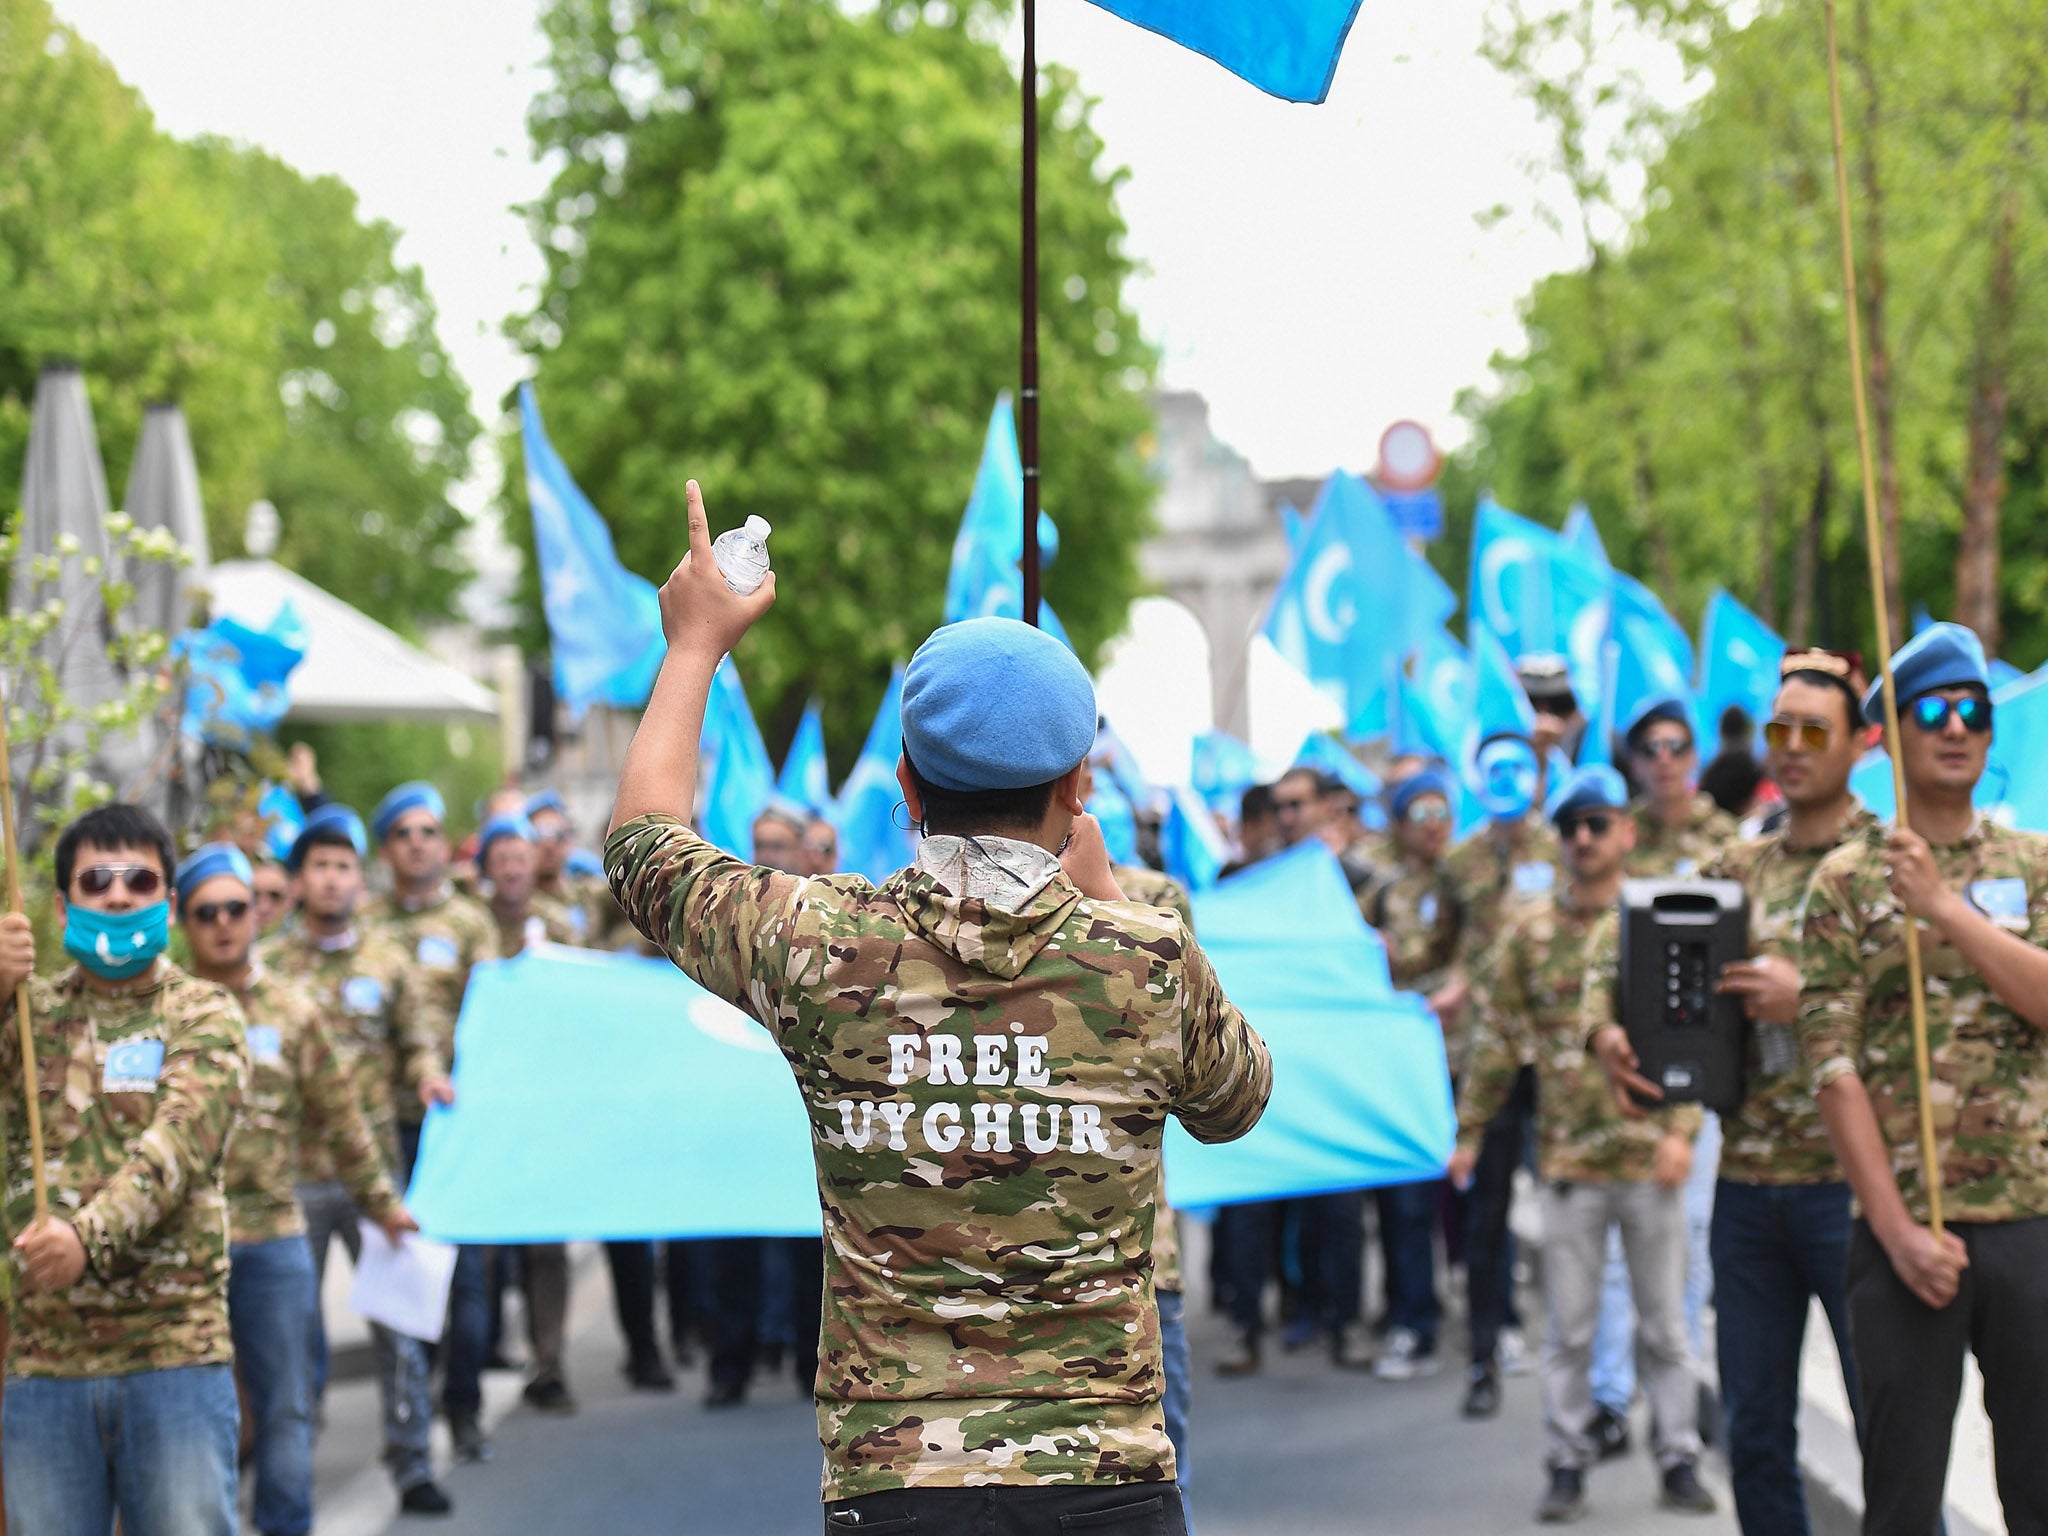 Uyghurs have to keep an eye on their present country’s relation with China; if the influence increases, so does the danger